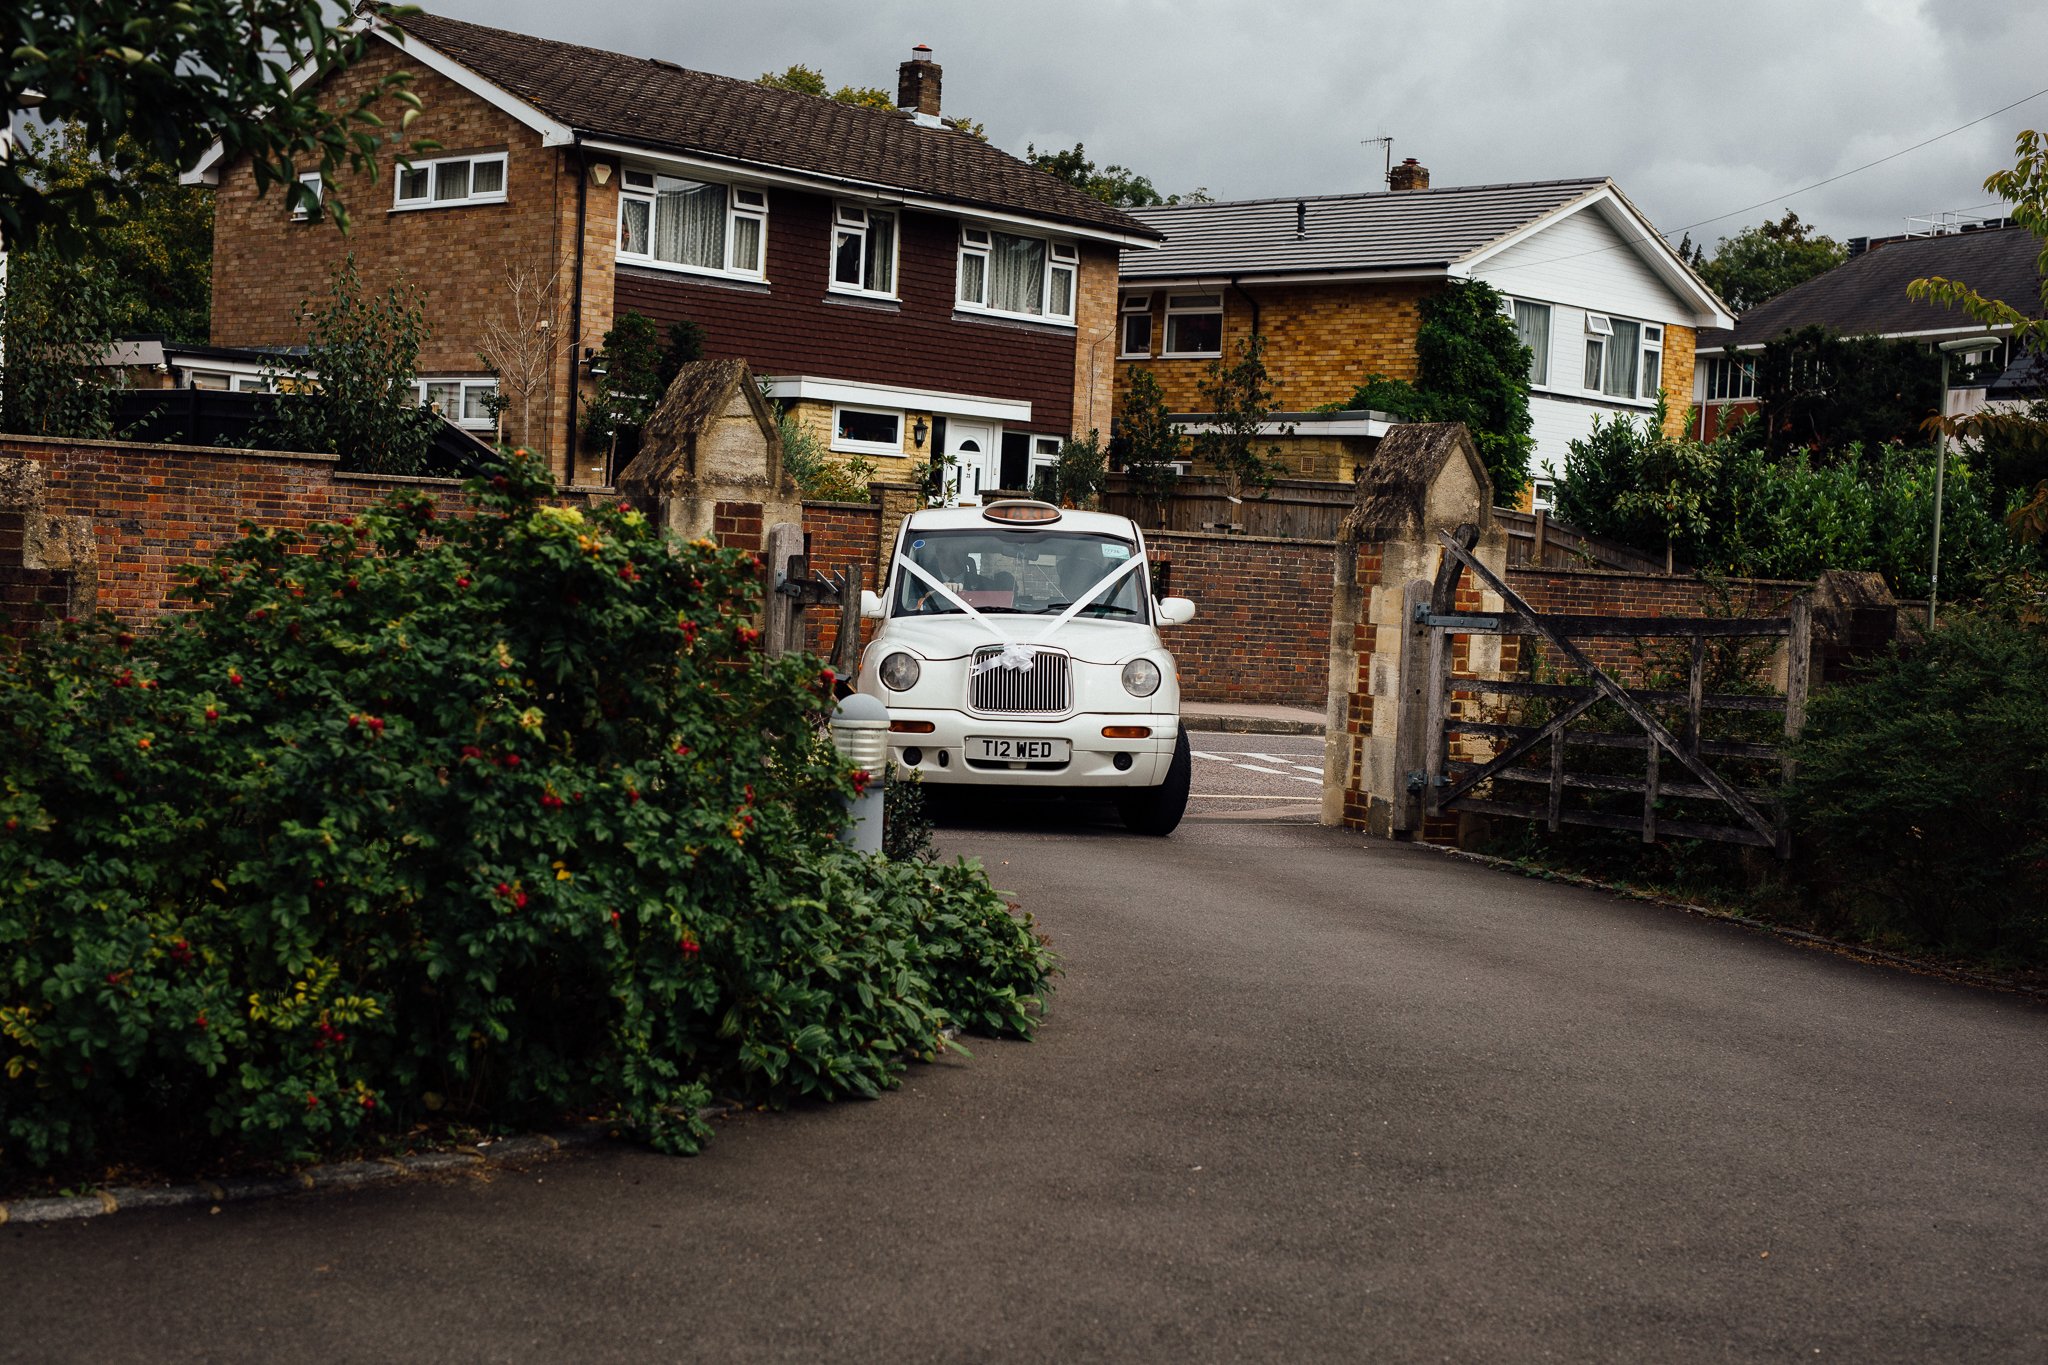  Bridal car arrives at The Holy Family Church in Reigate 